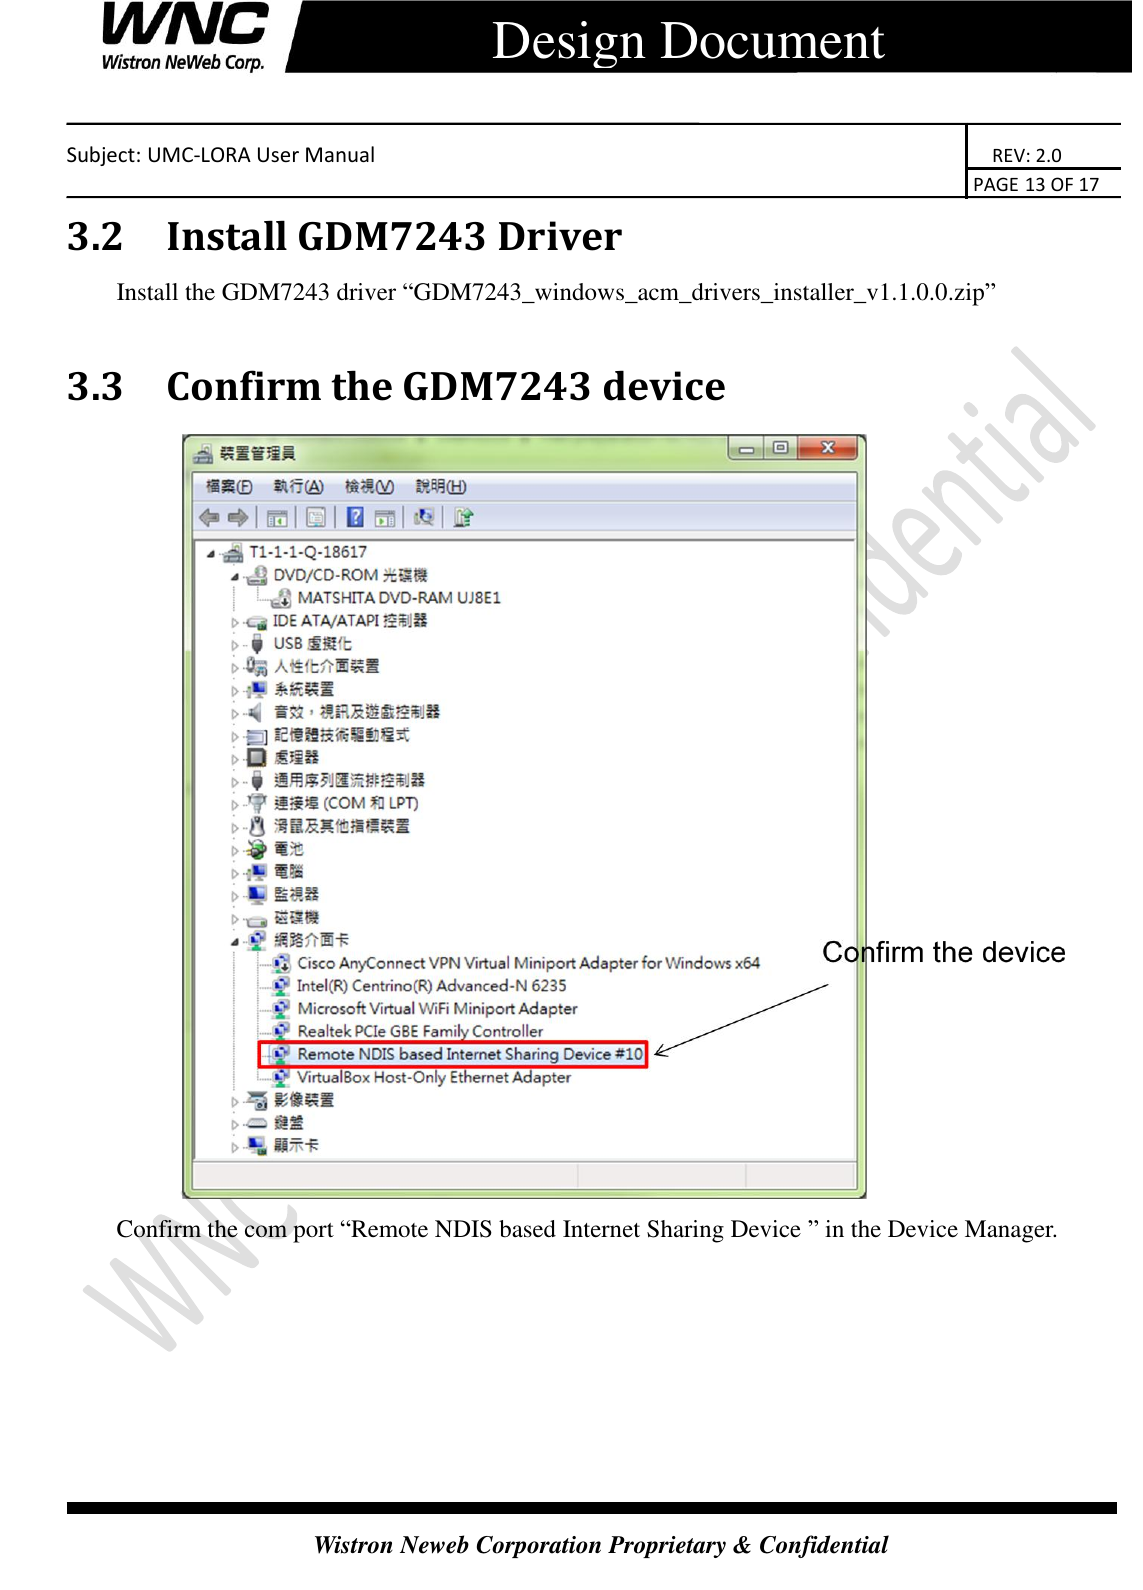    Subject: UMC-LORA User Manual                                                                      REV: 2.0                                                                                        PAGE 13 OF 17  Wistron Neweb Corporation Proprietary &amp; Confidential      Design Document 3.2 Install GDM7243 Driver Install the GDM7243 driver “GDM7243_windows_acm_drivers_installer_v1.1.0.0.zip”  3.3 Confirm the GDM7243 device    Confirm the com port “Remote NDIS based Internet Sharing Device ” in the Device Manager.   